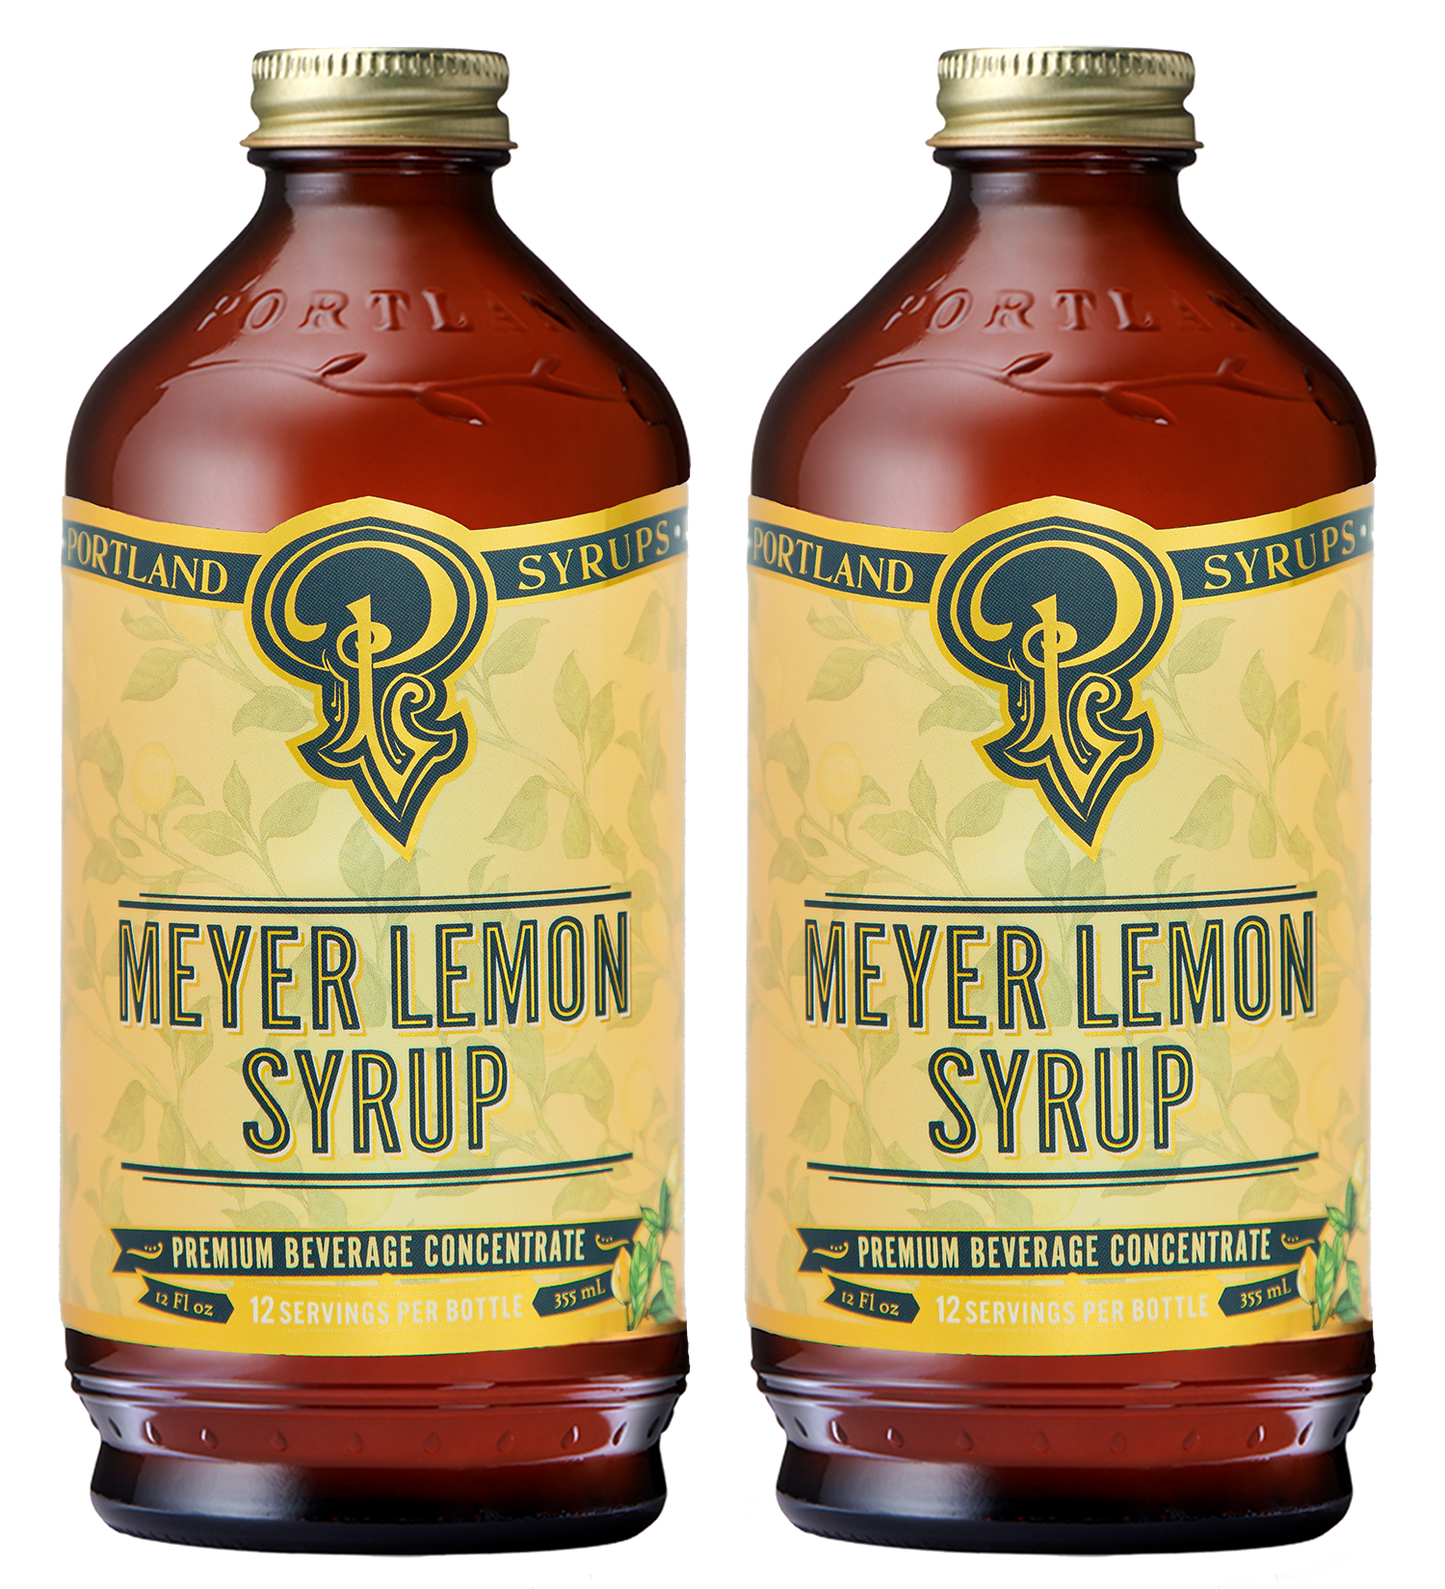 Meyer Lemon Syrup two-pack by Portland Syrups